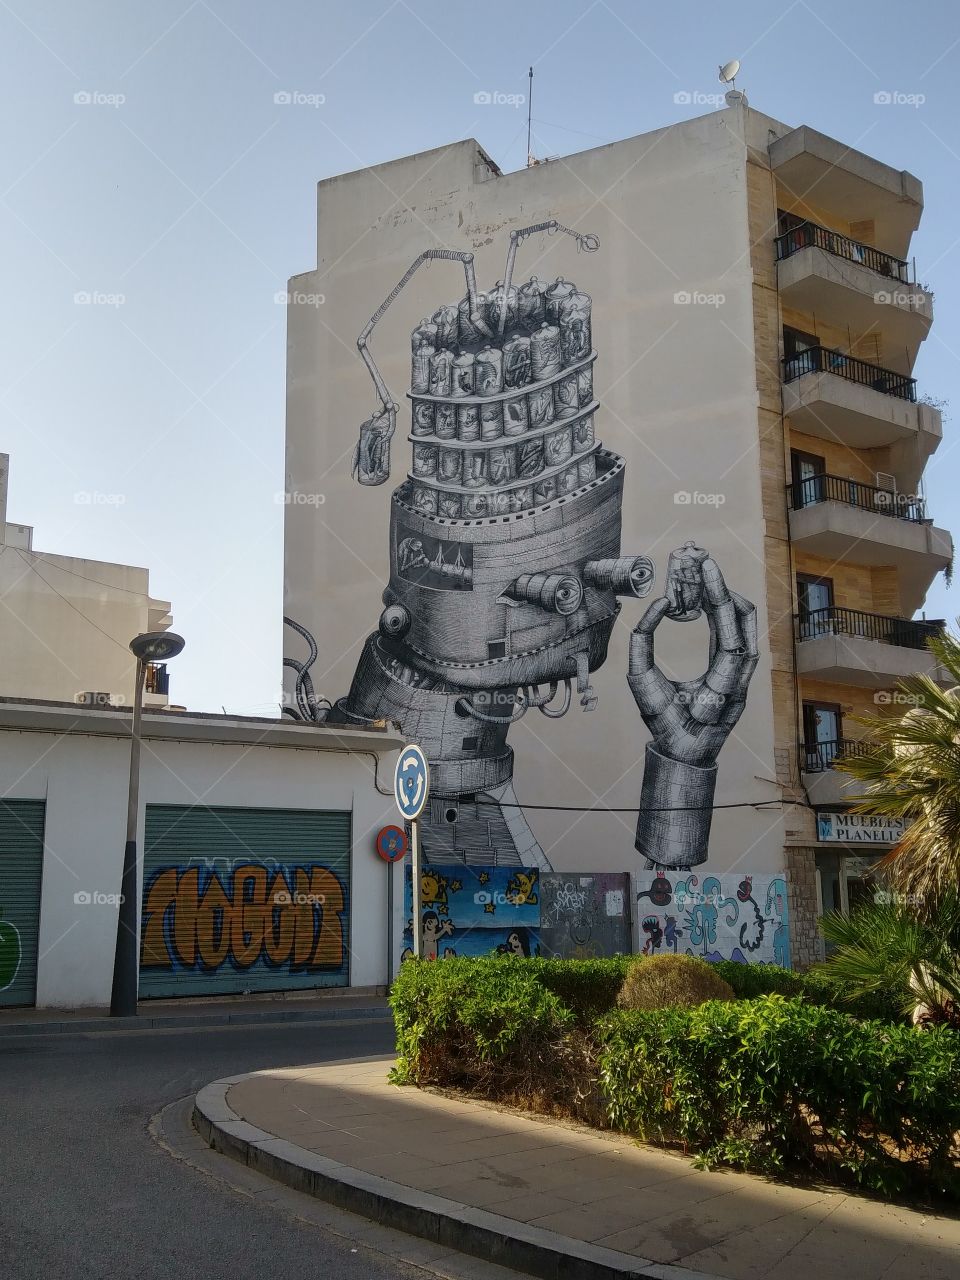 A stunning robot graffiti on the wall of a building in Ibiza.